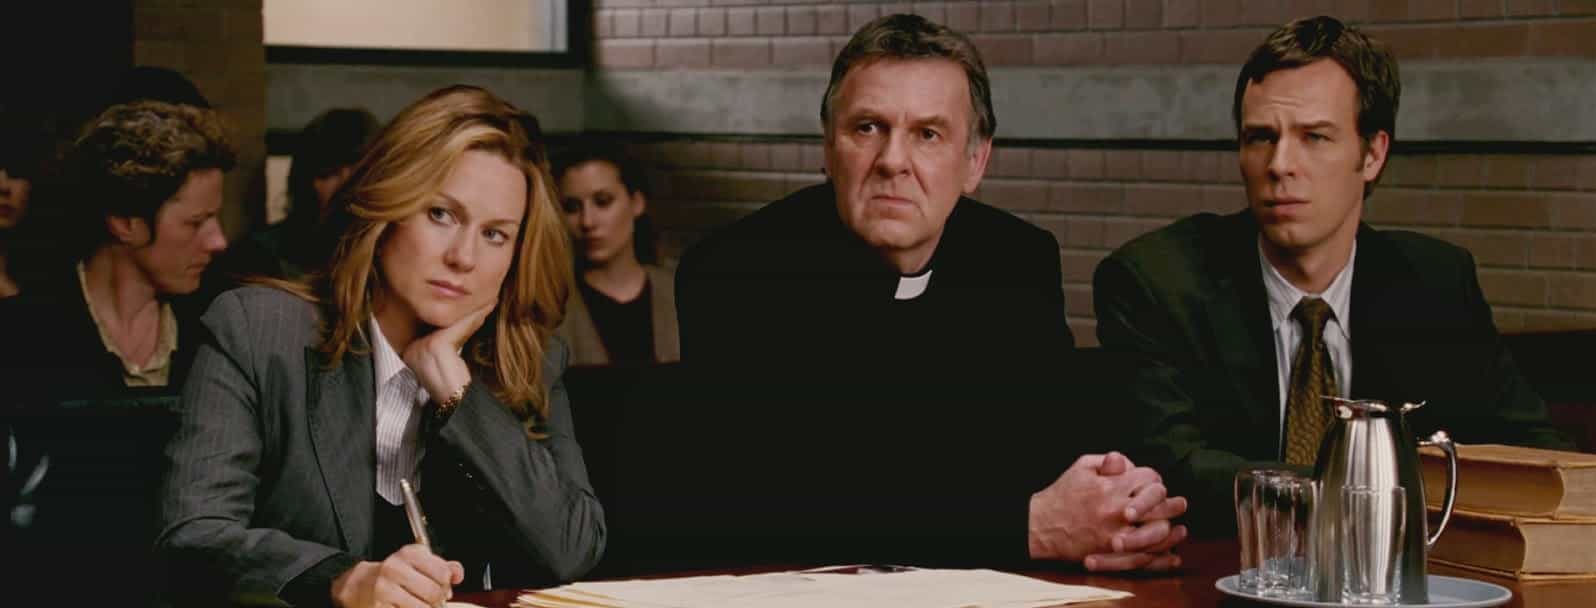 Courtroom Scene from "The Exorcism of Emily Rose"